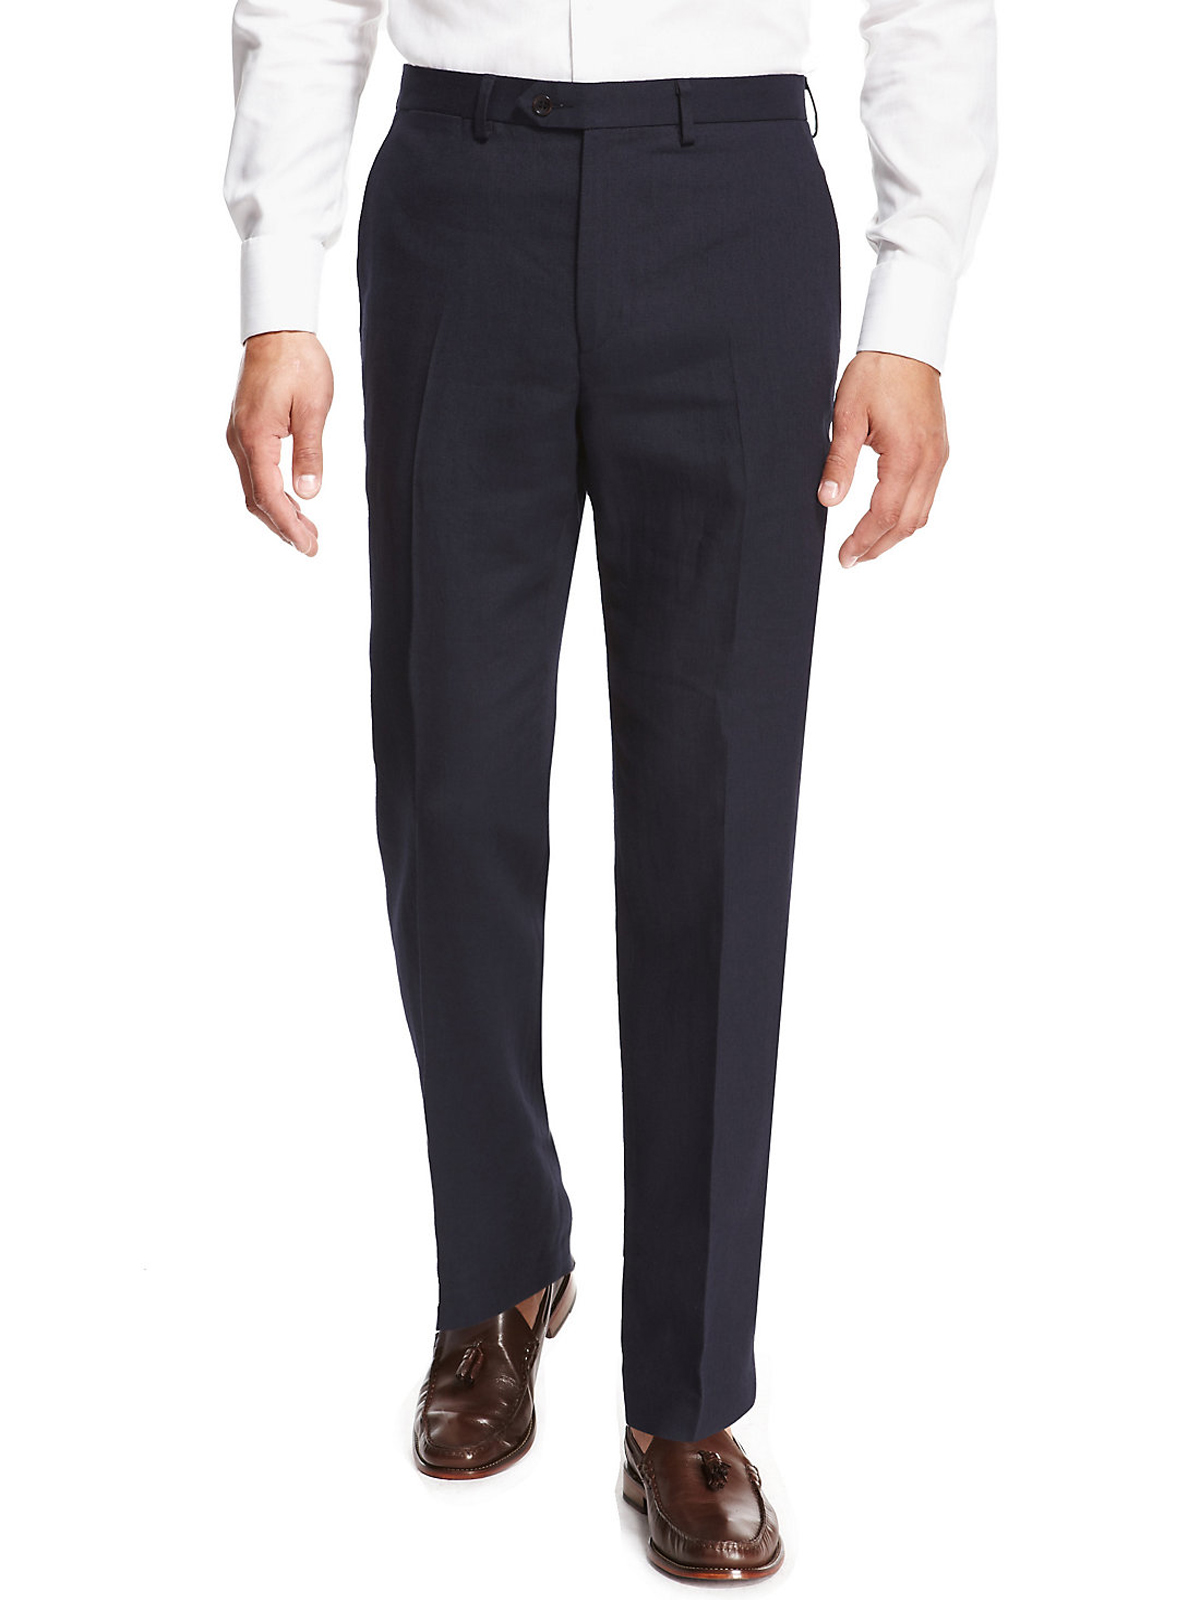 Marks and Spencer - - M&5 ASSORTED Mens Trousers - Waist Size 32 to 42 ...